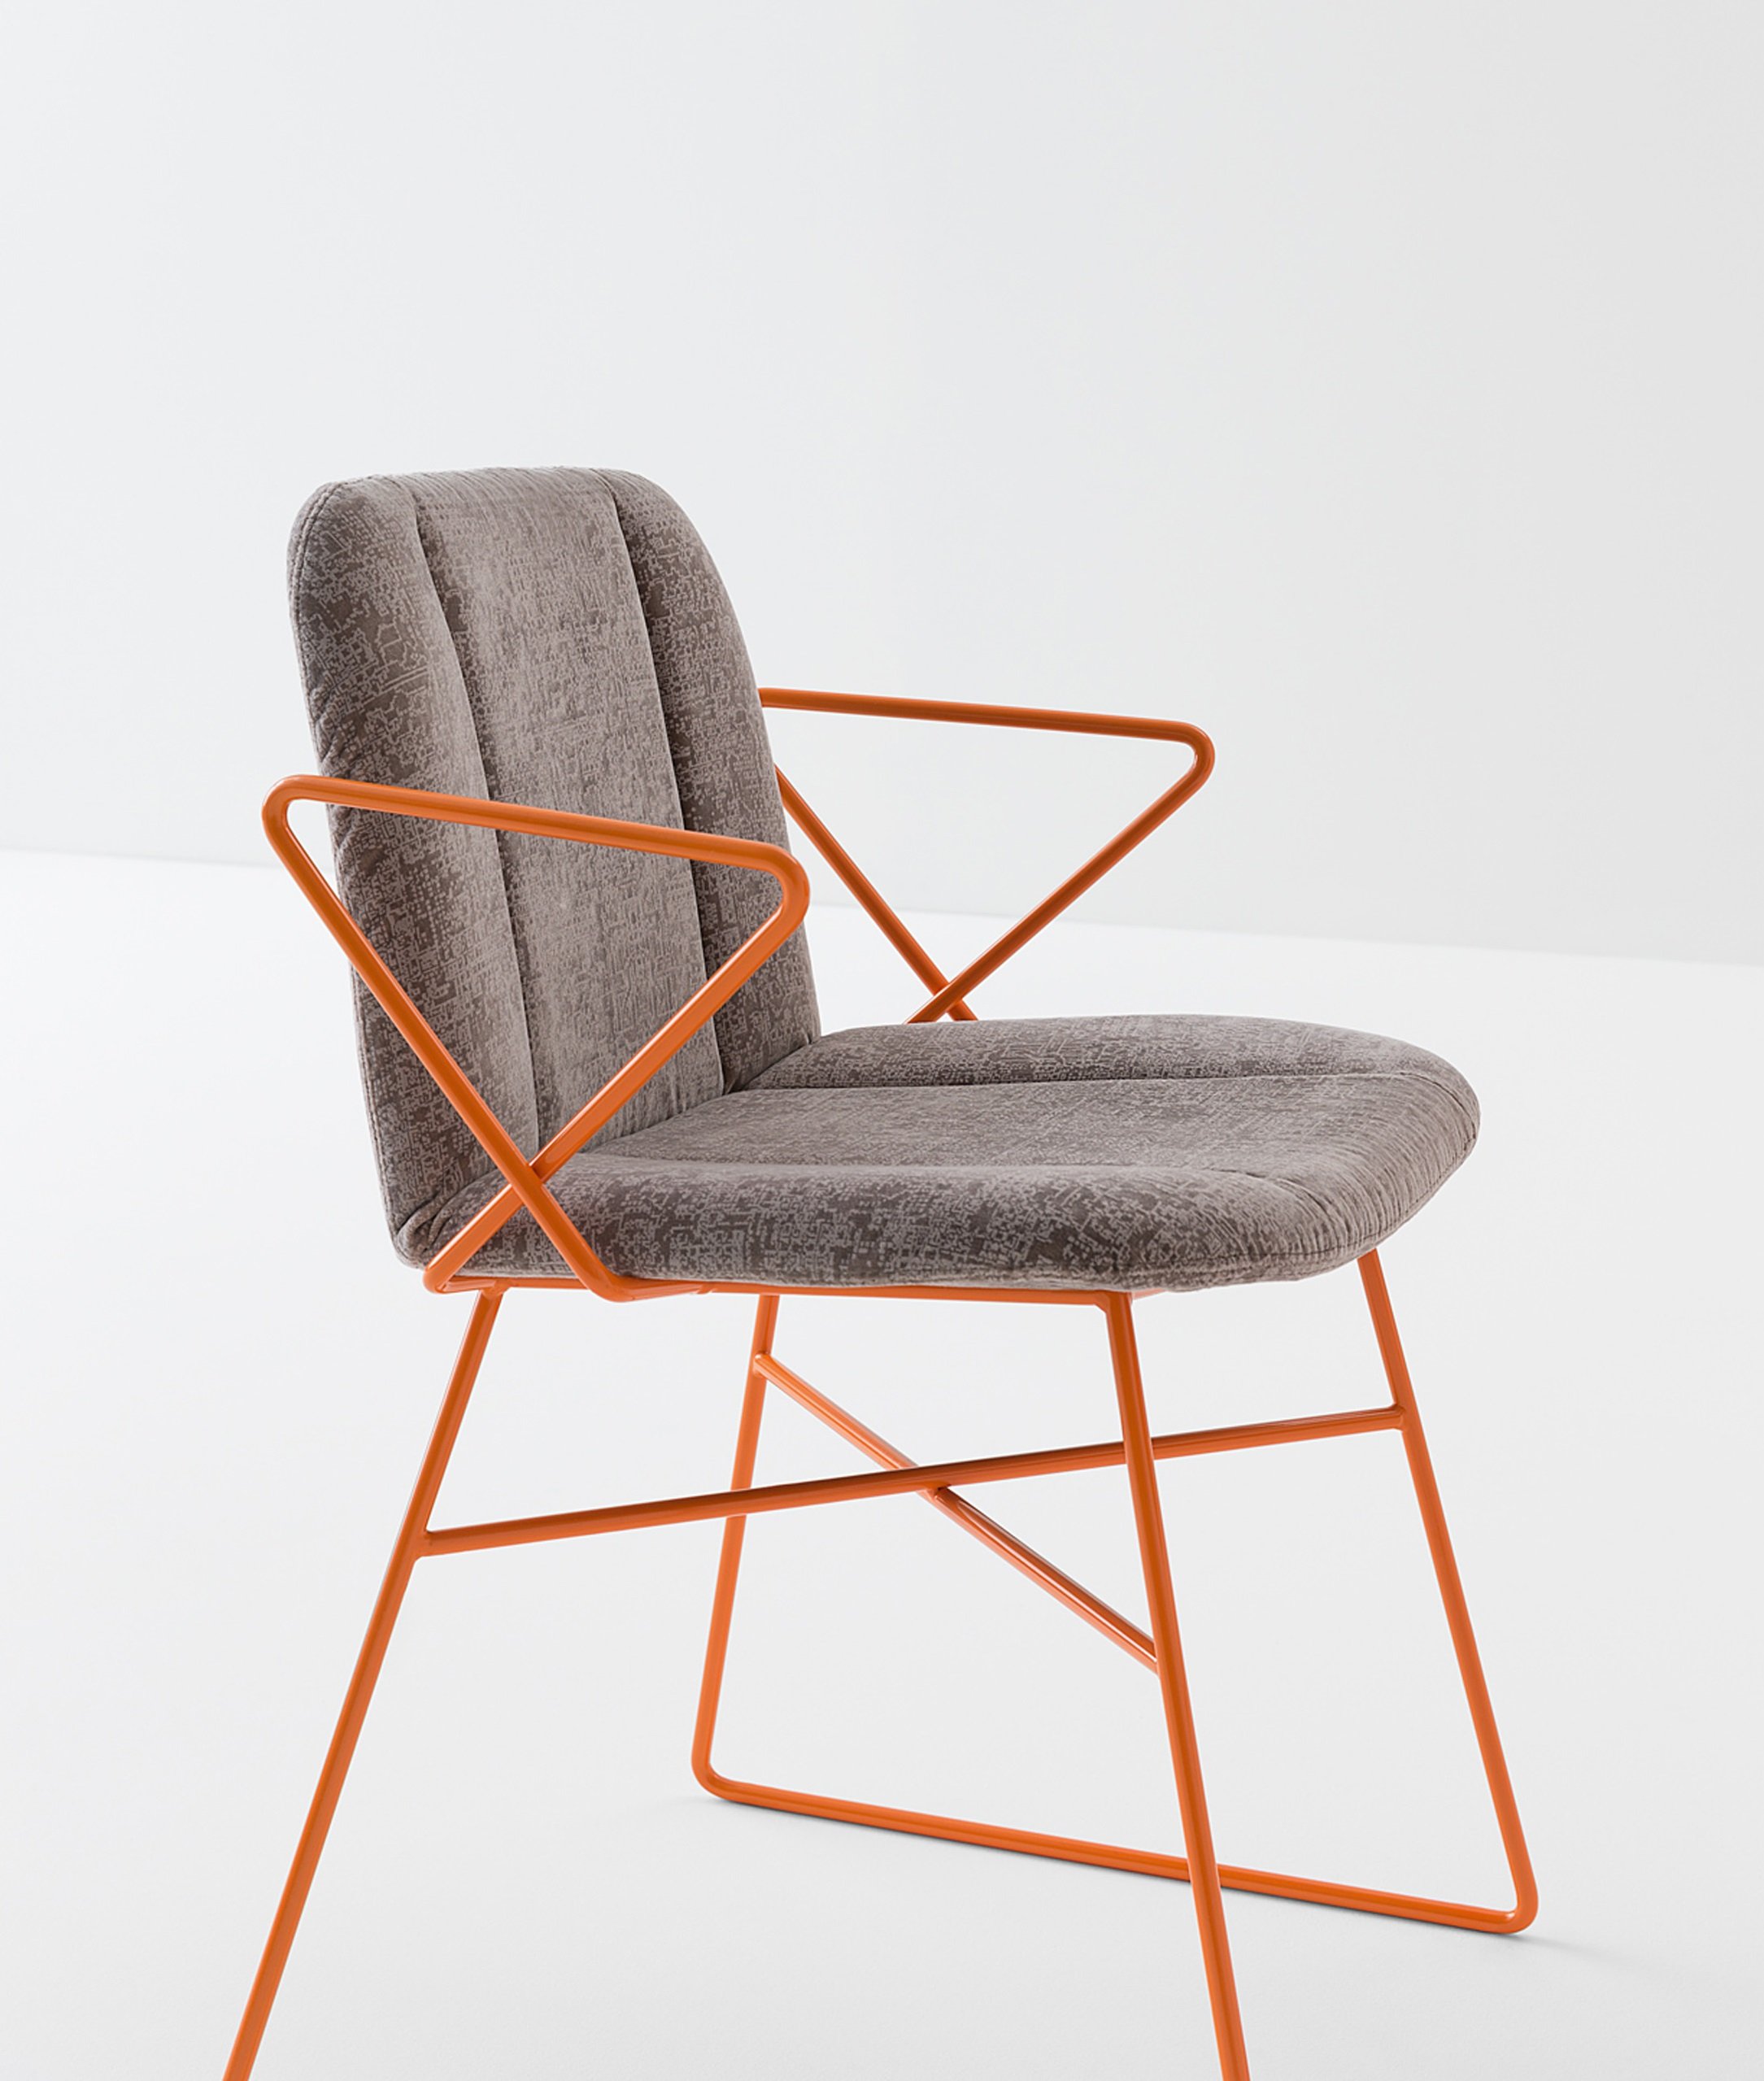 Hippy Dining Chair from Billiani, designed by Emilio Nanni